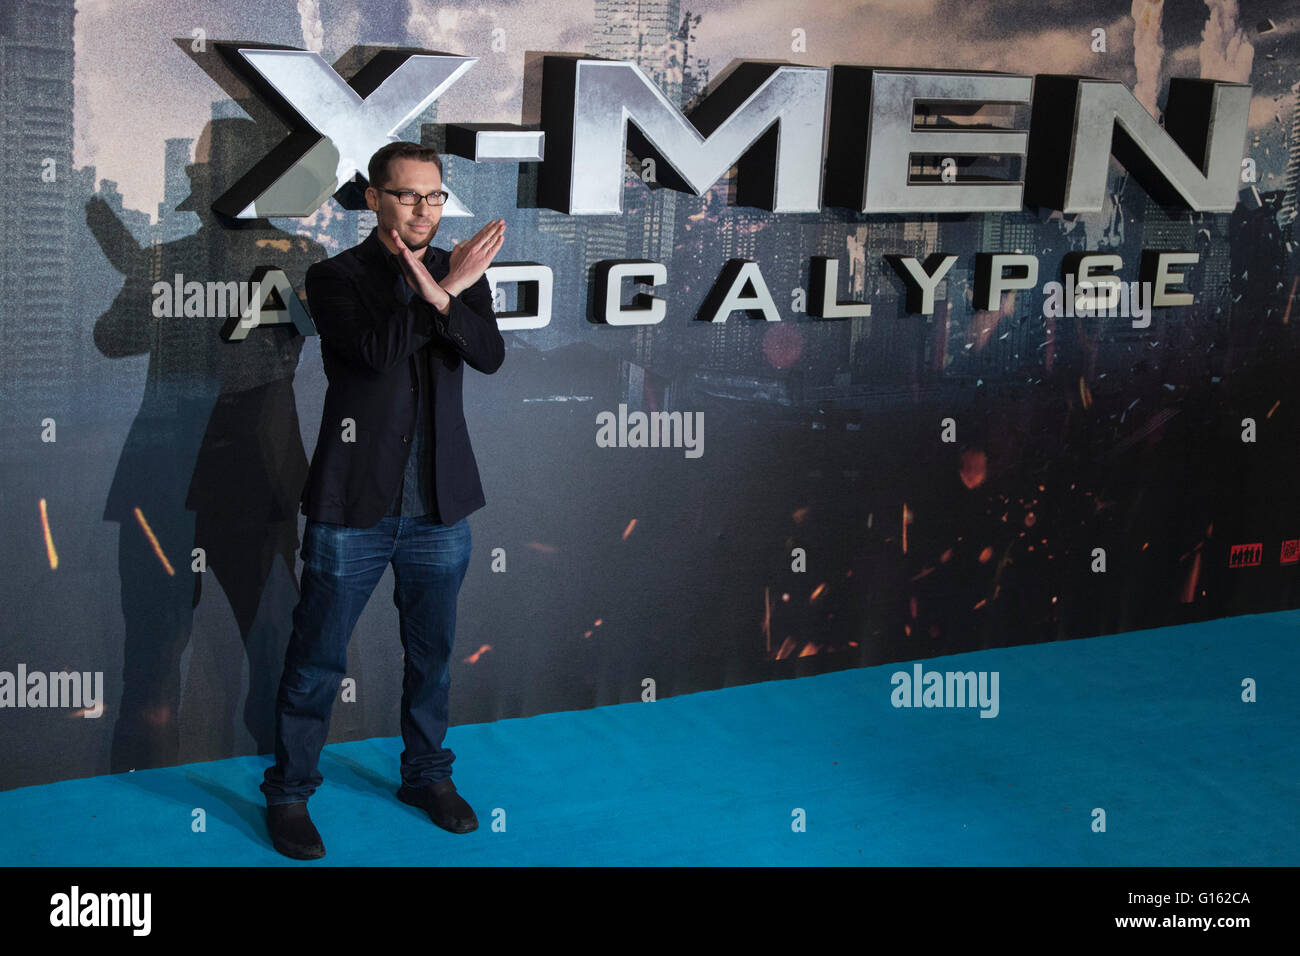 London, UK. 9 May 2016. Director Bryan Singer attends the X-Men: Apocalypse - Global Fan Screening at the BFI Imax cinema in London. Credit:  Vibrant Pictures/Alamy Live News Stock Photo